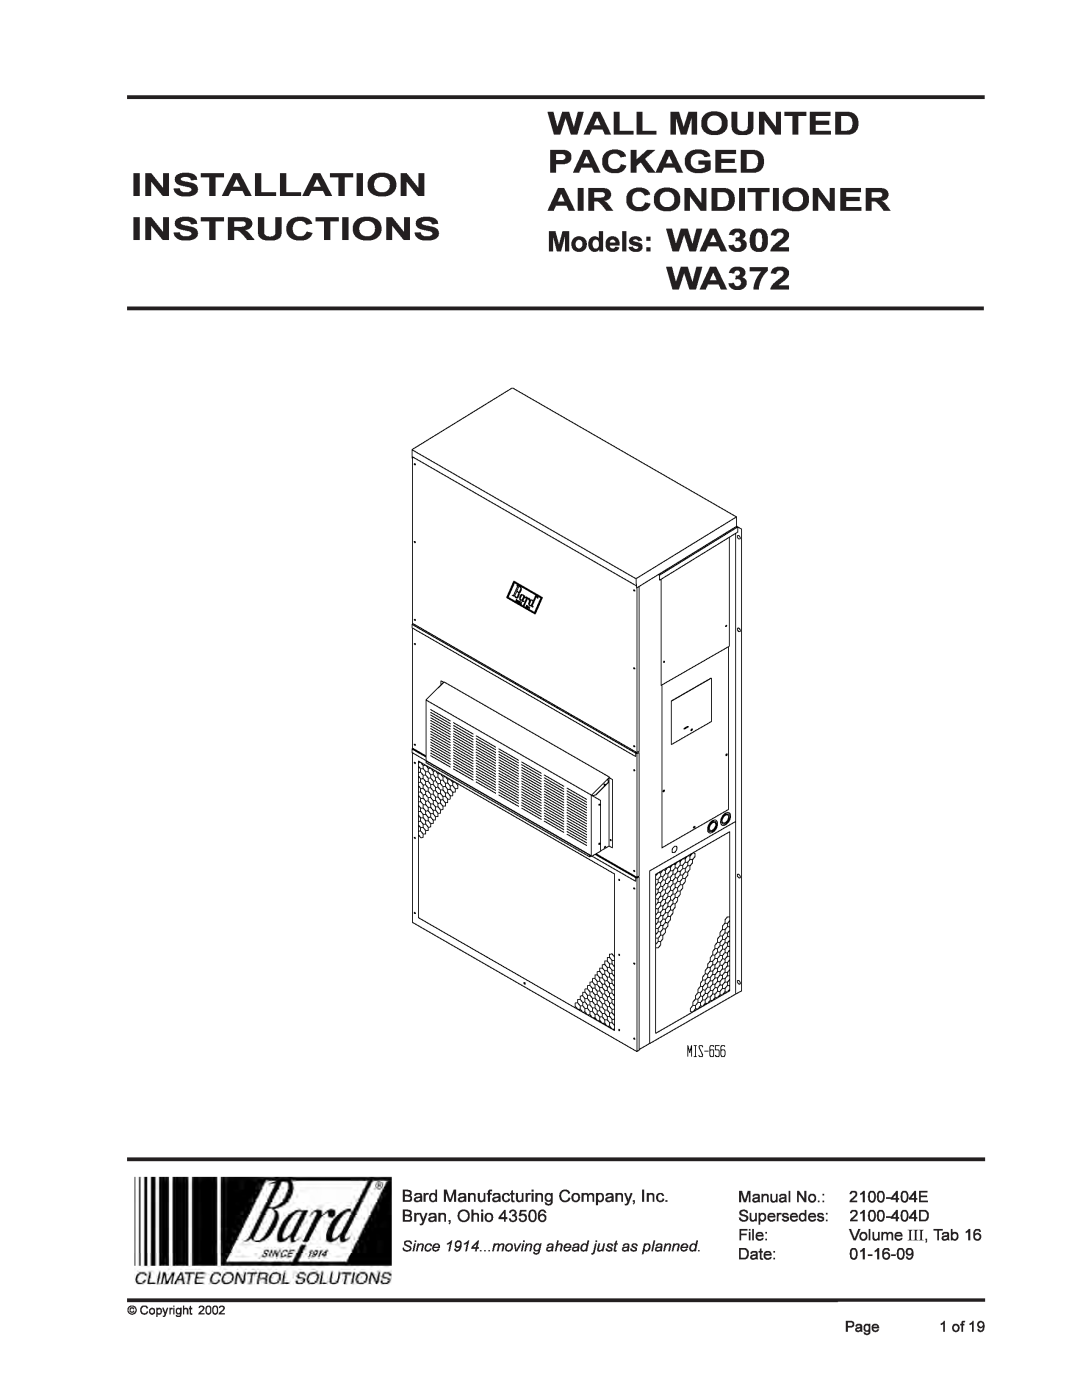 Bard 2100-404E installation instructions Wall Mounted, Installation, Packaged, Air Conditioner, Instructions, WA372, File 